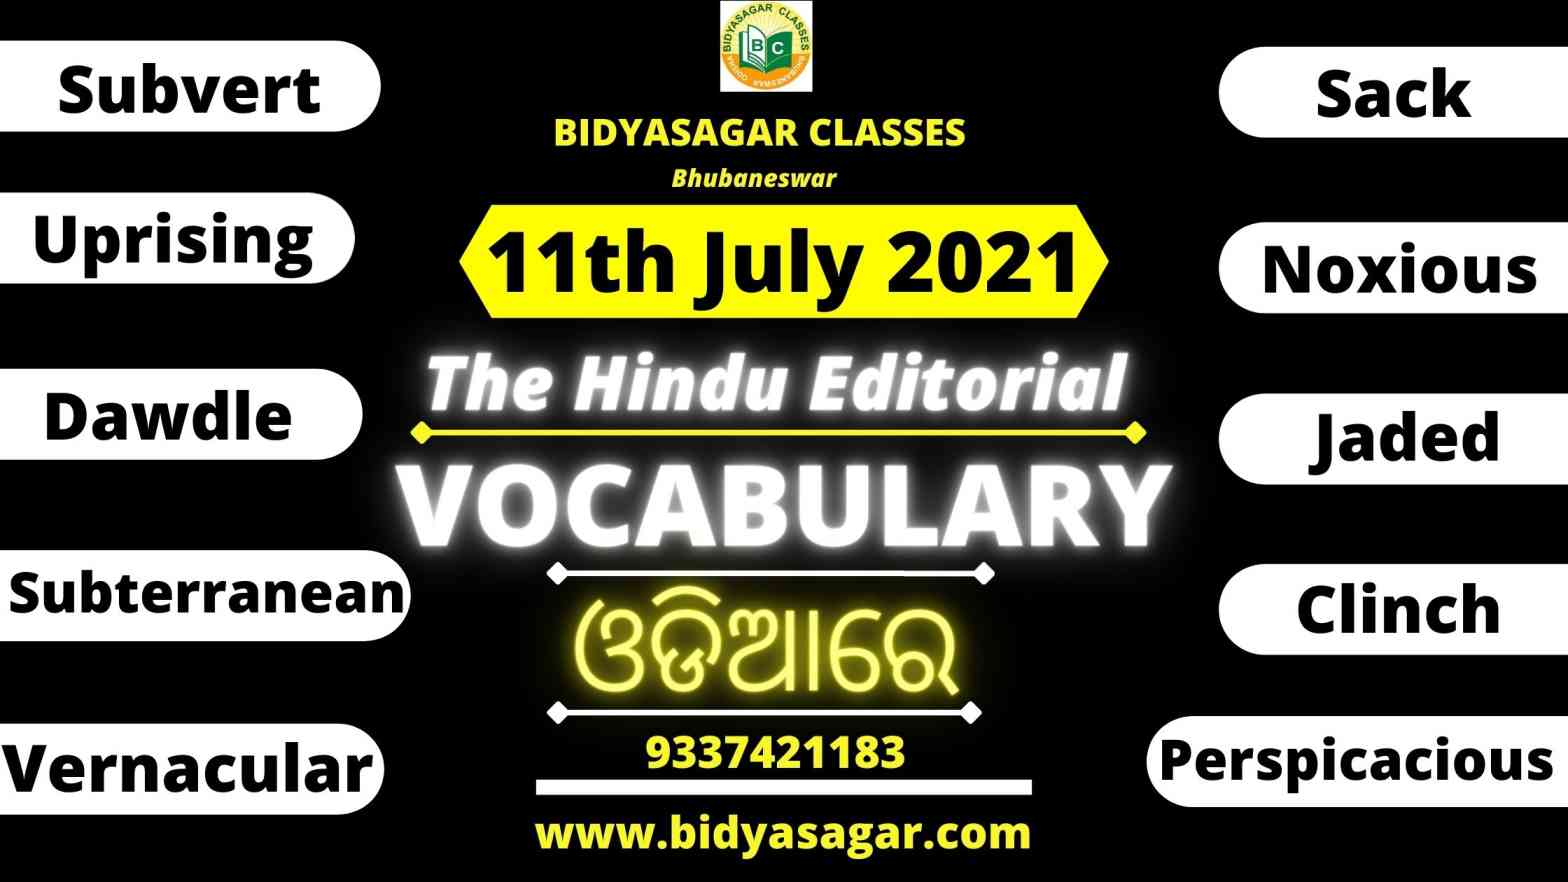 The Hindu Editorial Vocabulary of 11th July 2021